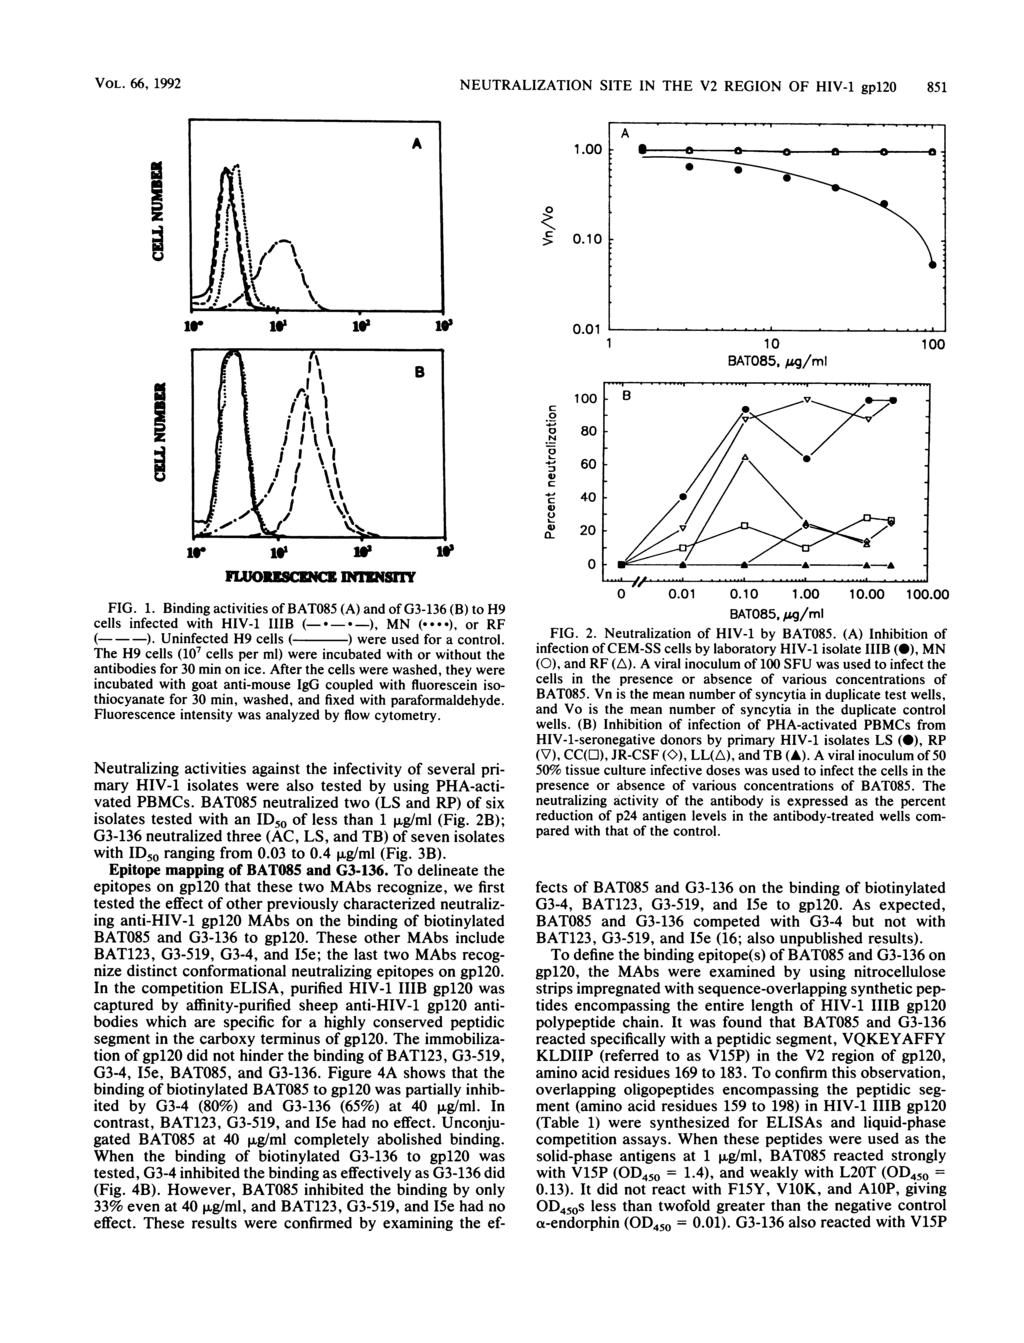 VOL. 66, 1992 NEUTRALIZATION SITE IN THE V2 REGION OF HIV-1 gp12 851 1. A --..P- - -- - - -.1 IA: *.1 1 1 BAT85, sg/mi 1 1. 8 ir 1W 1W 1W ILO SICZI7'Nn () 8 6 4 4. 2 FIG. 1. Binding ativities of BAT85 (A) and of G3-136 (B) to H9 ells infeted with HIV-1 IIIB ( *), MN (.